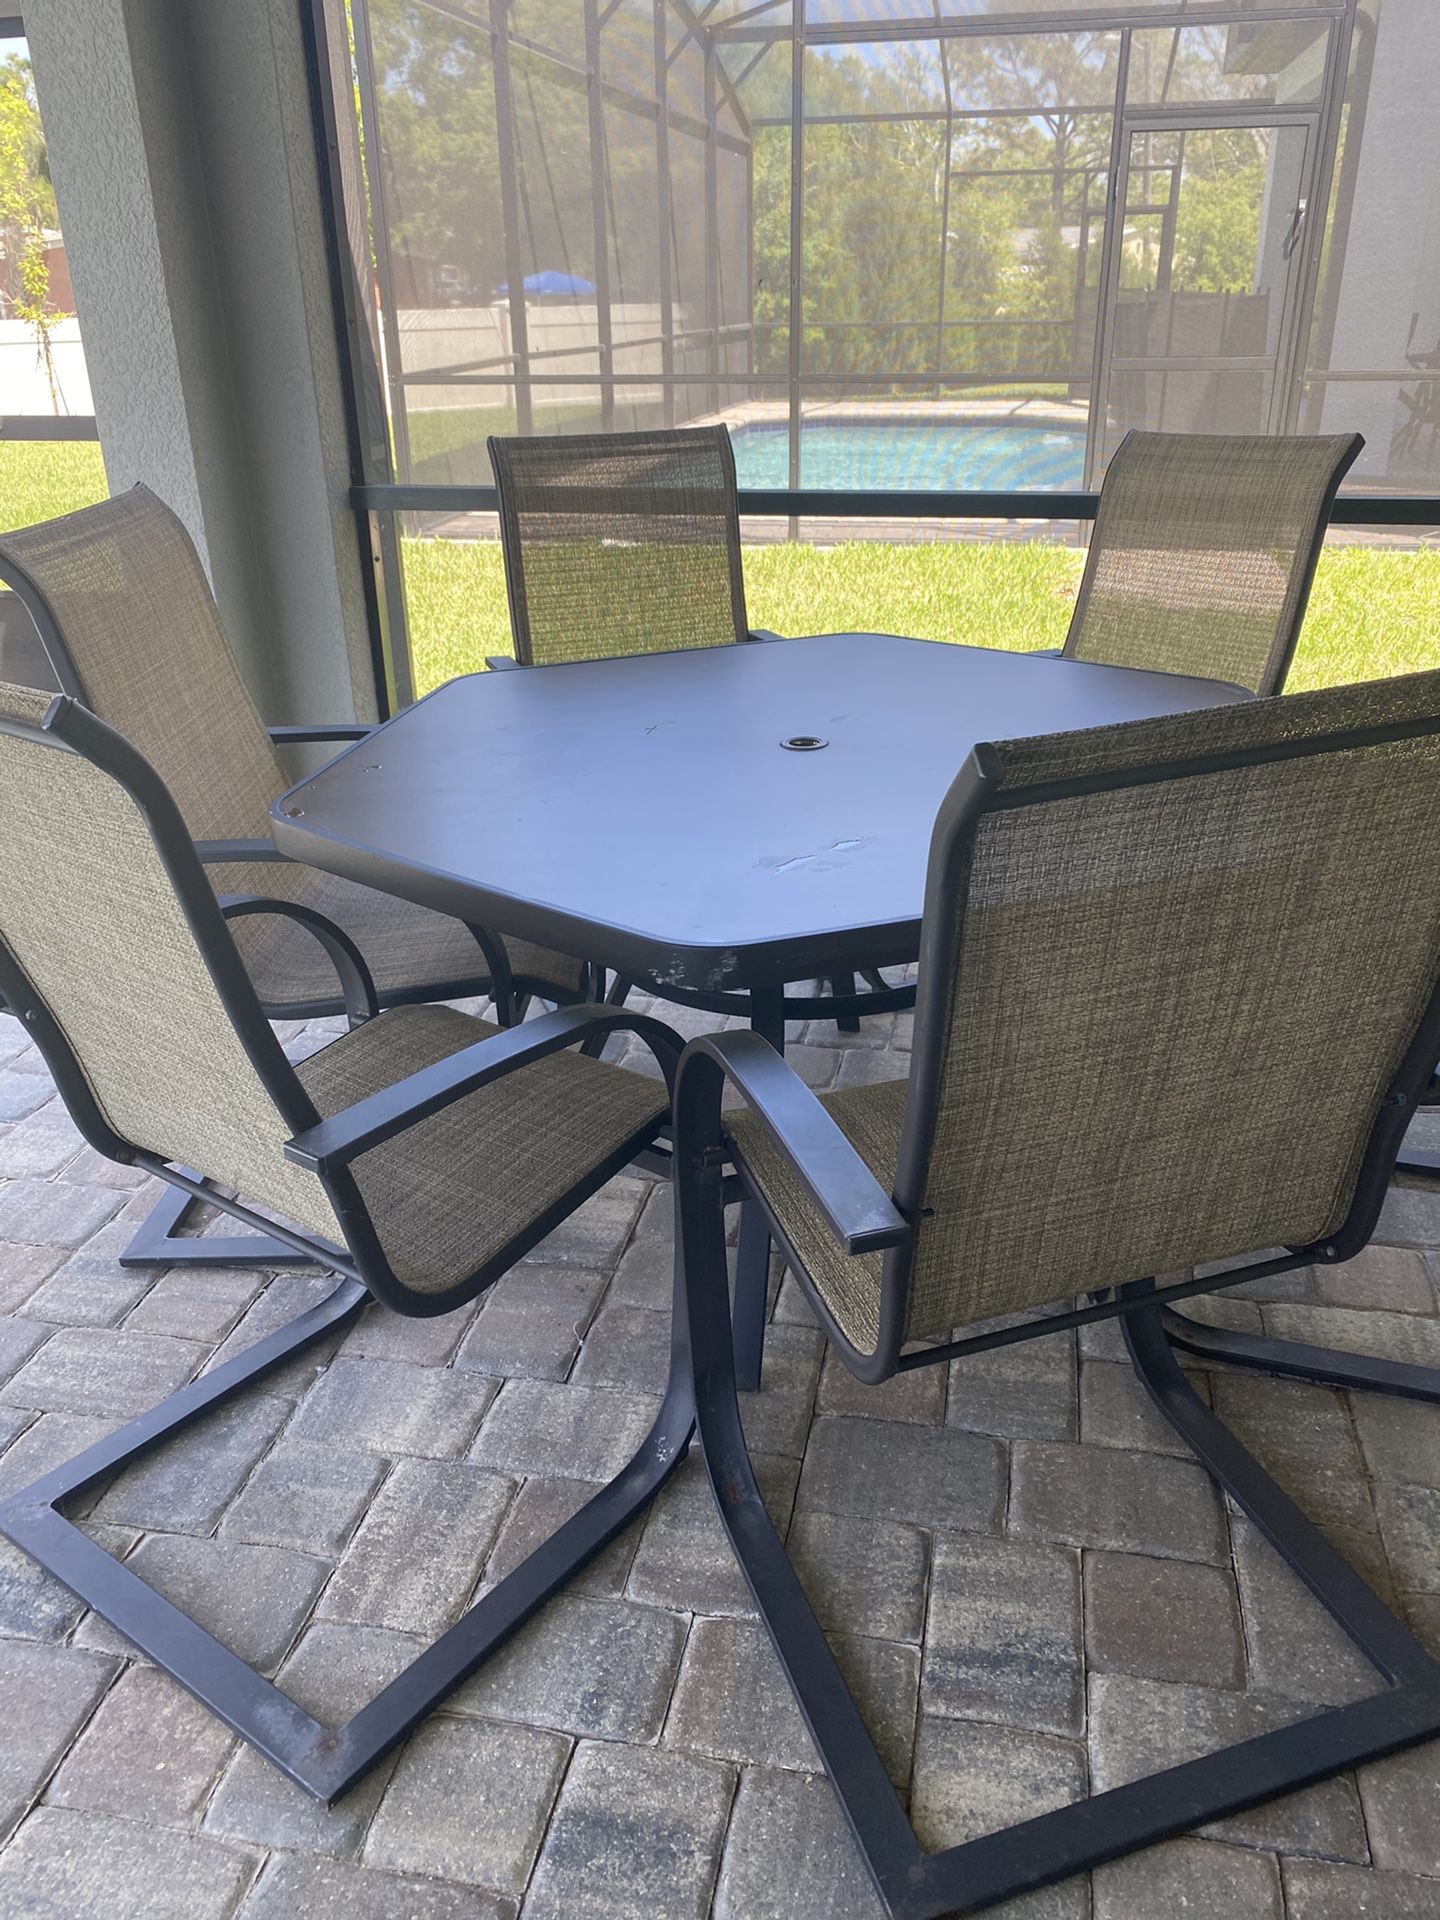 Patio table with chair